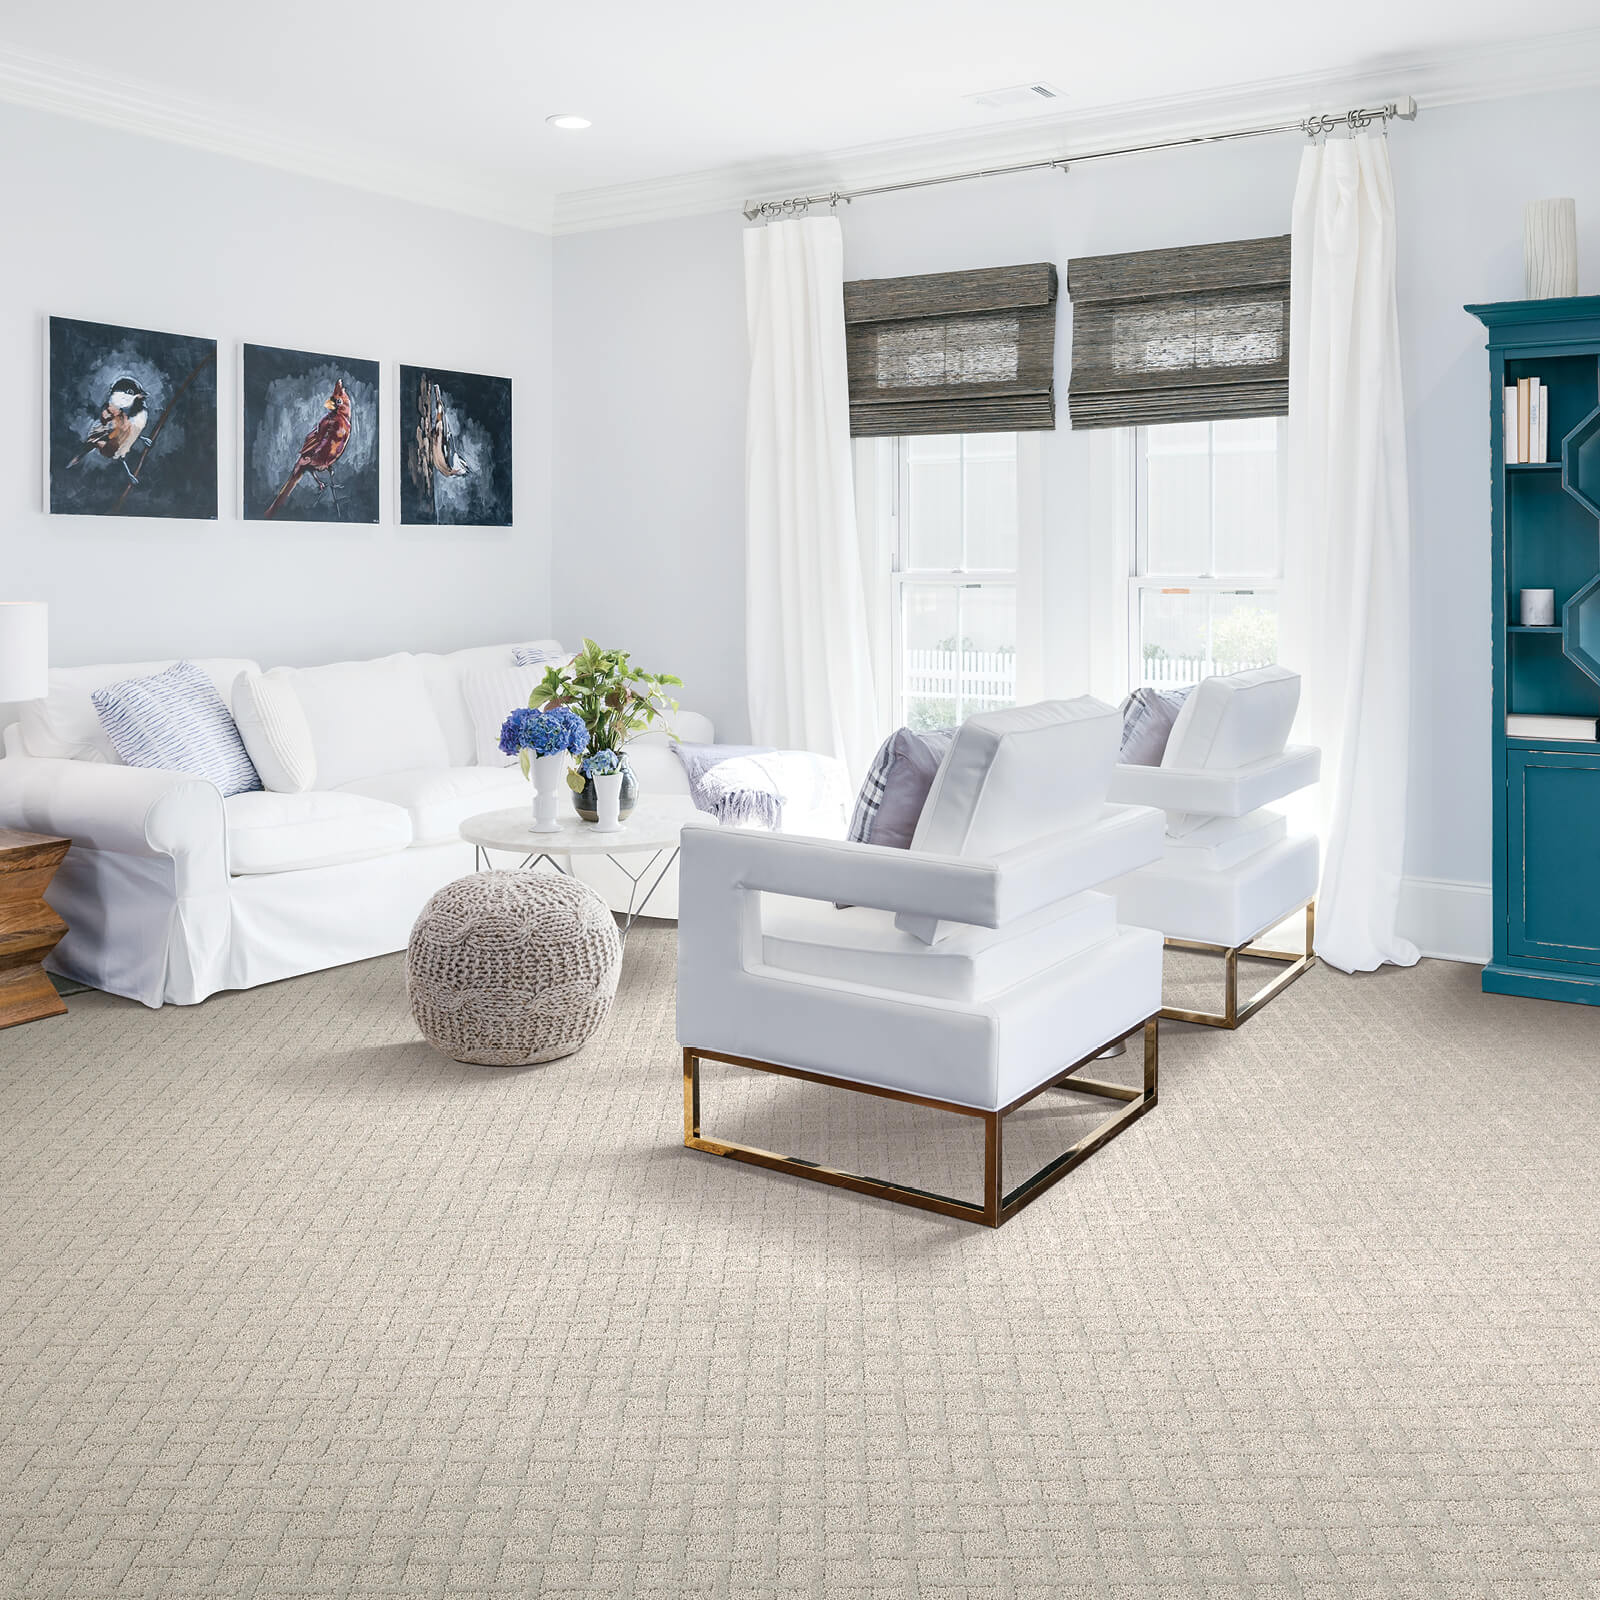 Carpet Binding Services  Shans Carpets and Fine Flooring in Houston